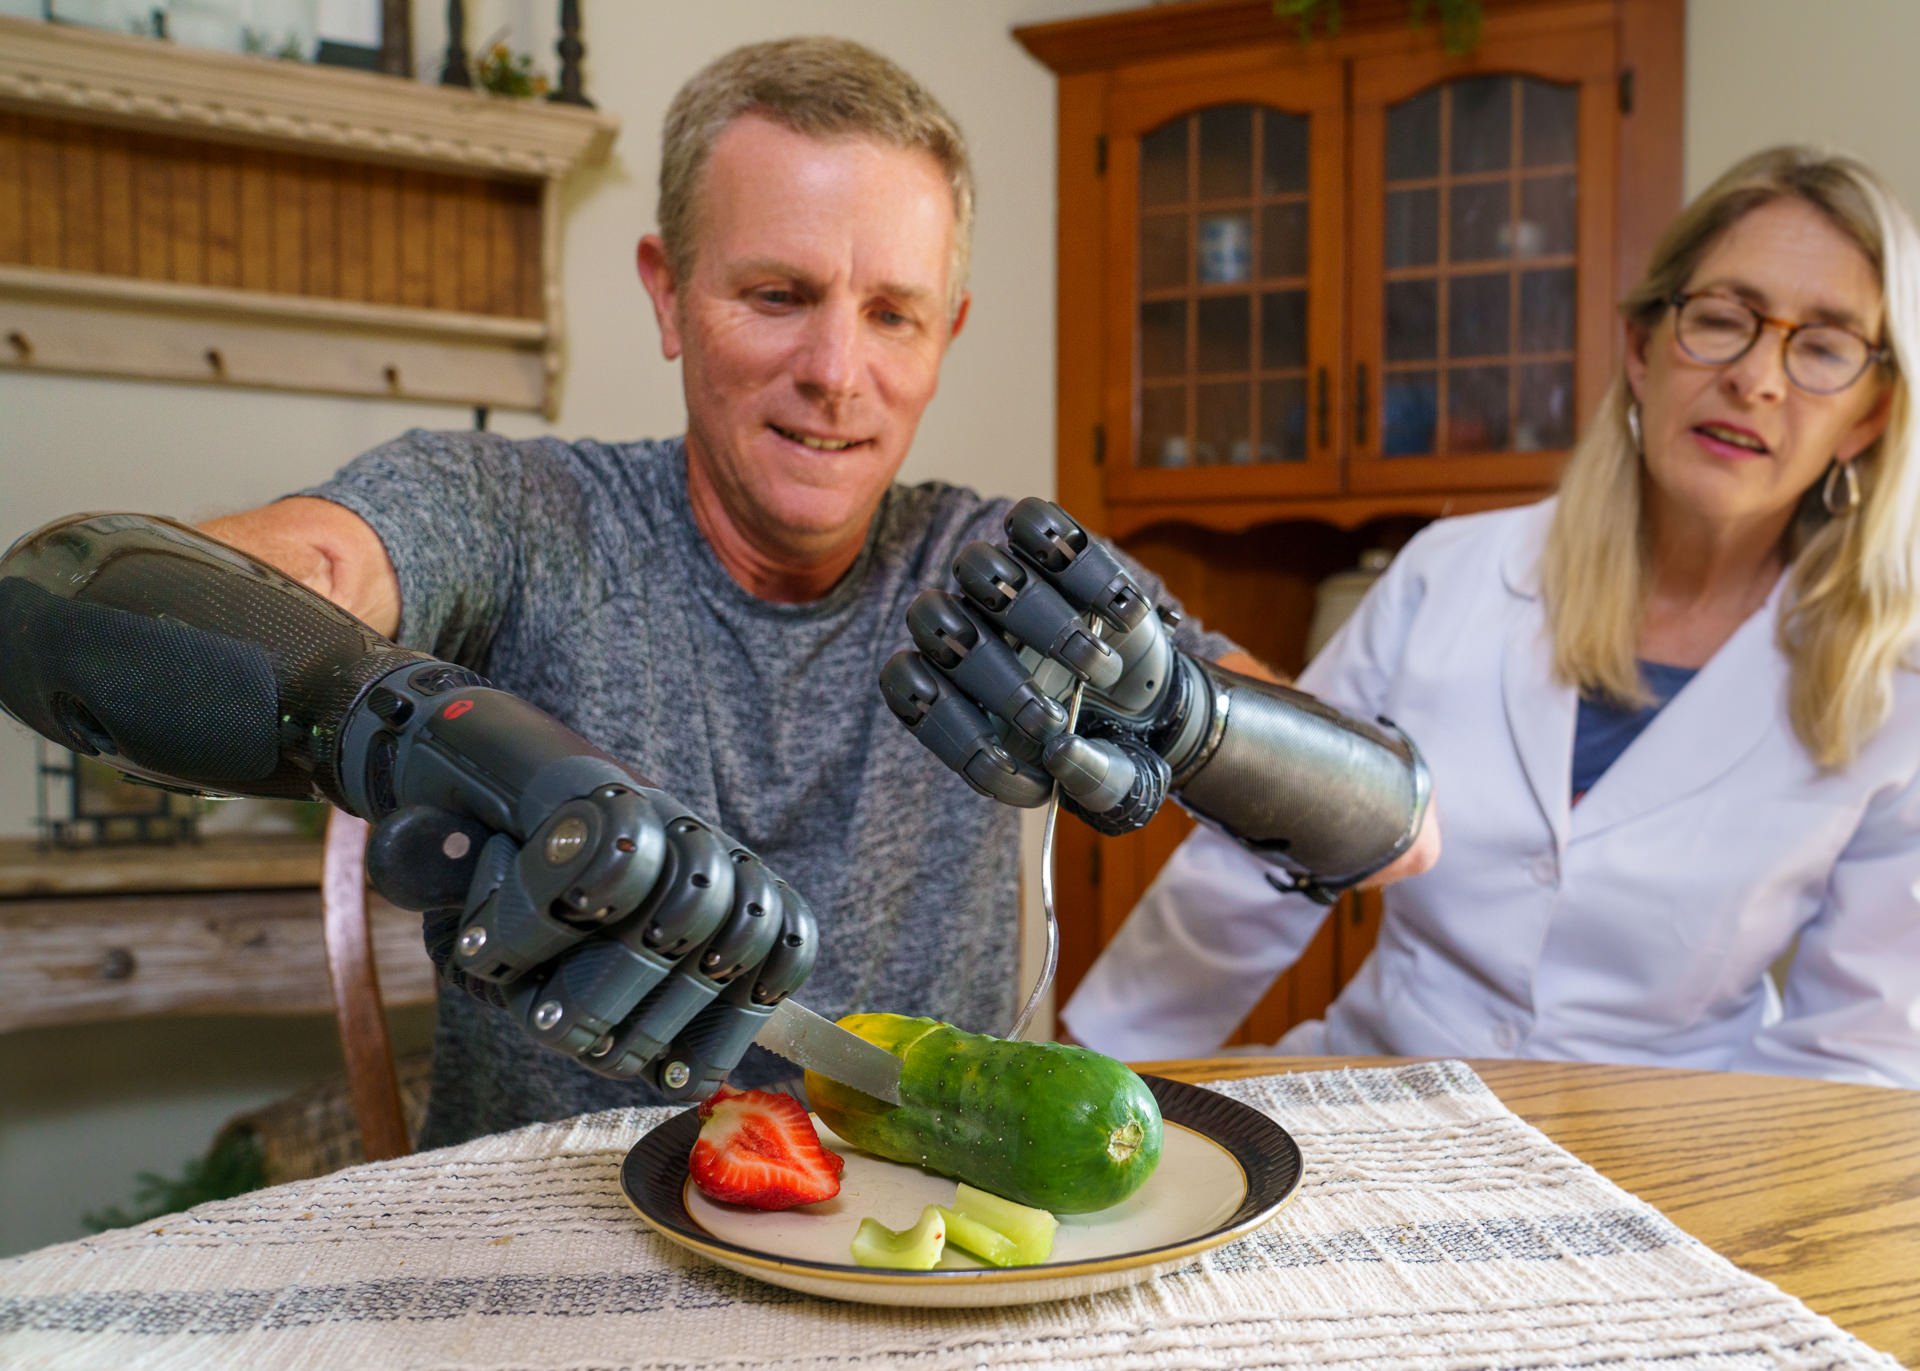 Gerry Kinney, a bilateral transradial patient, uses his TASKA myoelectric hands to cut food in a clinical therapy exercise.